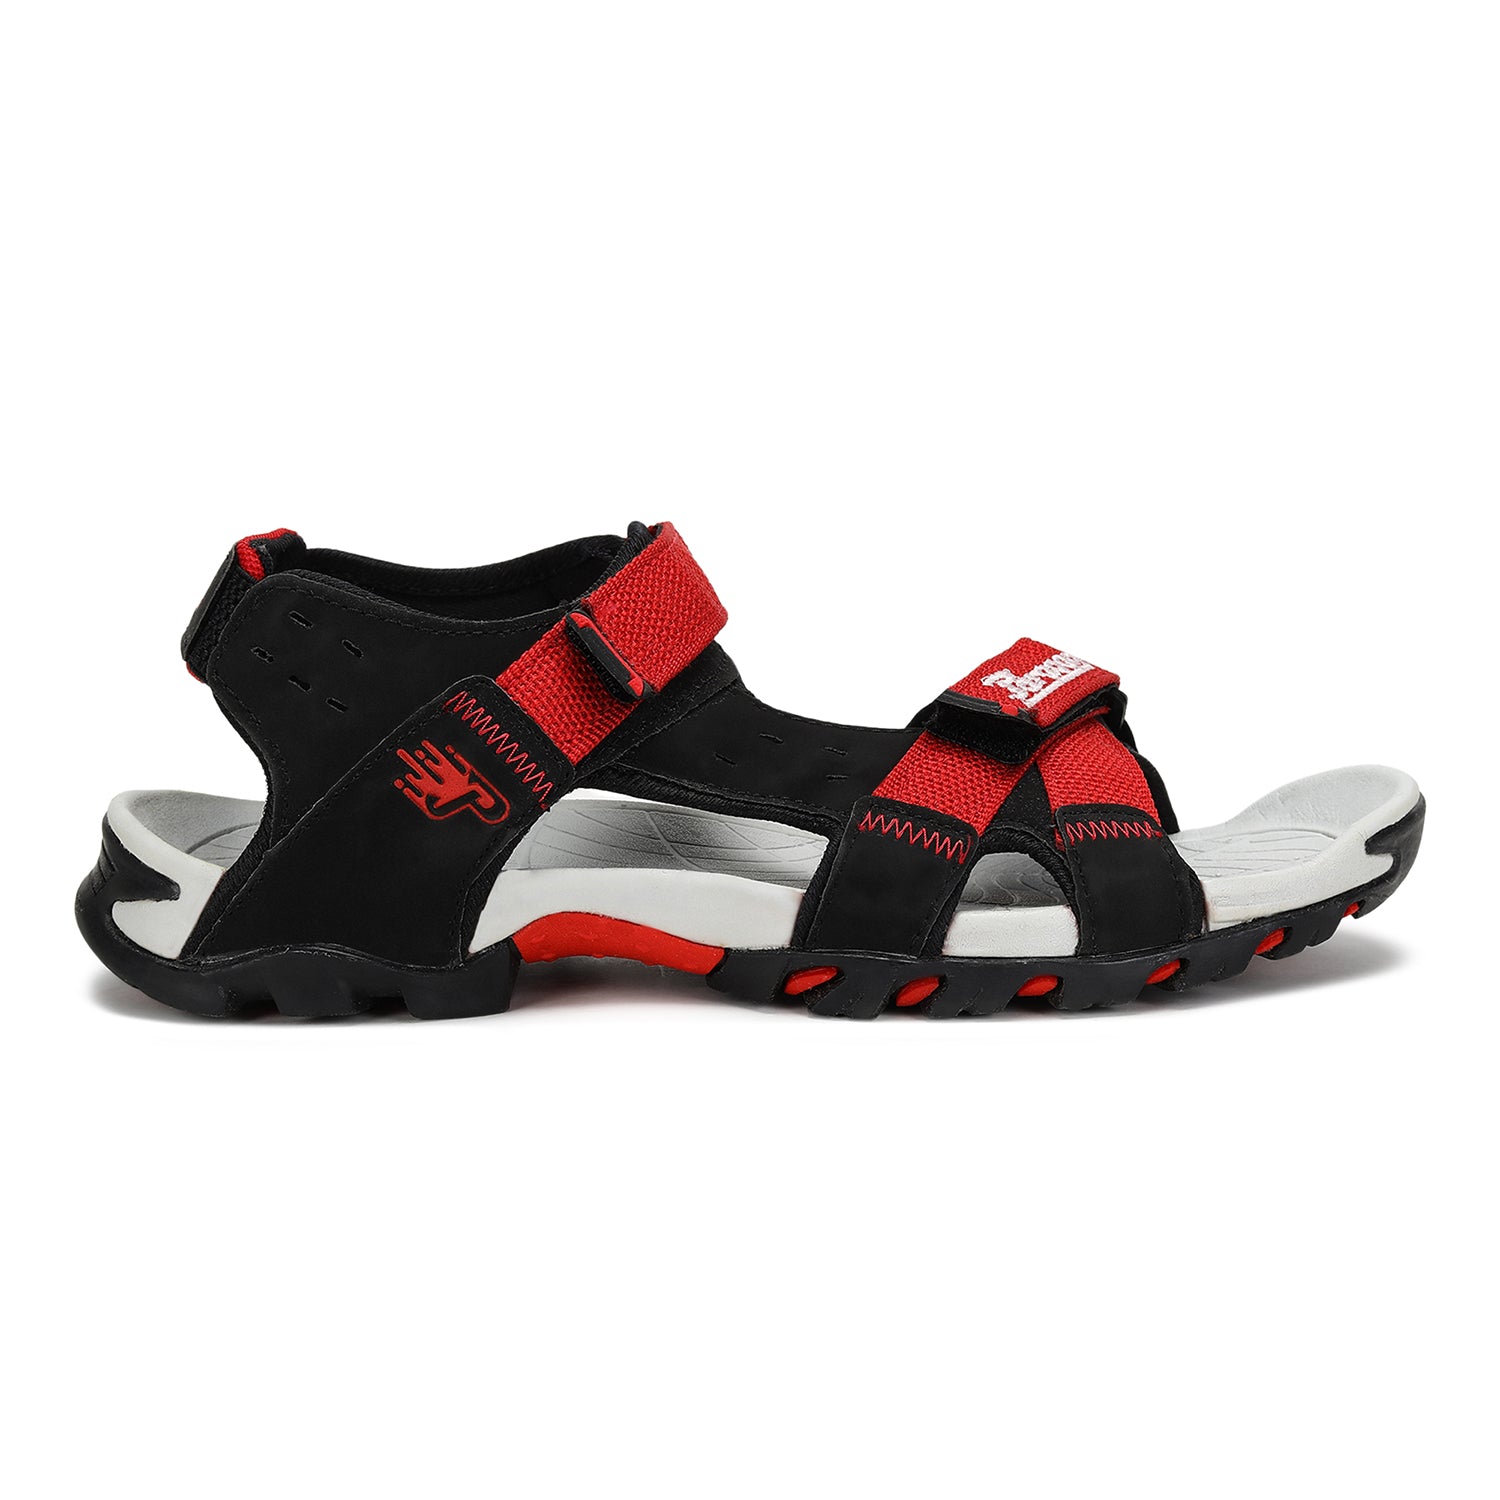 Paragon K1403G Men Stylish Sandals | Comfortable Sandals for Daily Outdoor Use | Casual Formal Sandals with Cushioned Soles